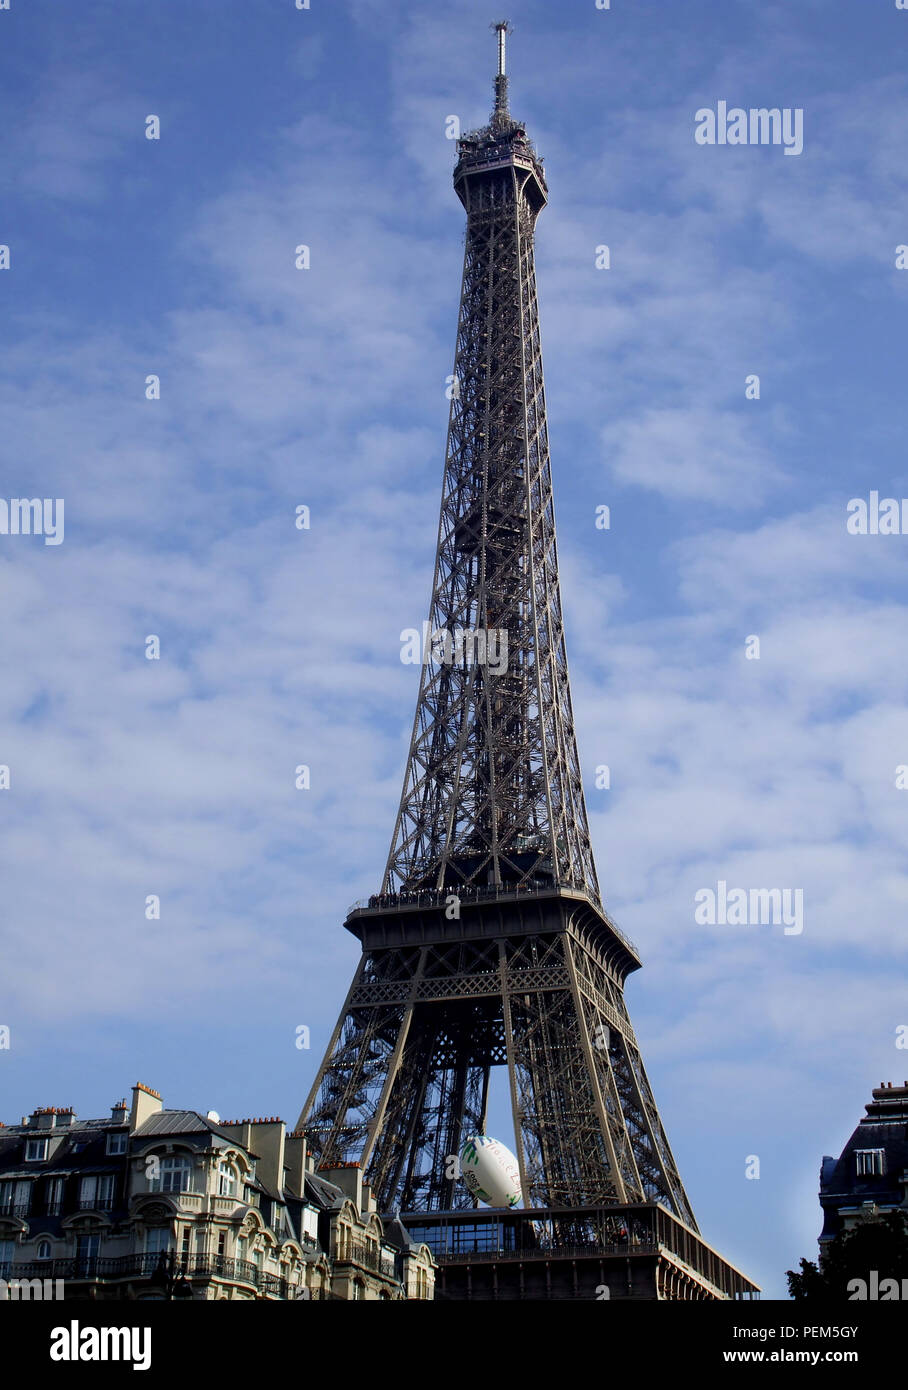 The iconic structure - The Eiffel Tower, which stands in Paris France. It was designed and built by Gustave Eiffel. It was started in January 1887 and is now the most visited paid monument in the world. It is 324 metres tall and is made from an iron lattice and held together by millions of rivets. Stock Photo